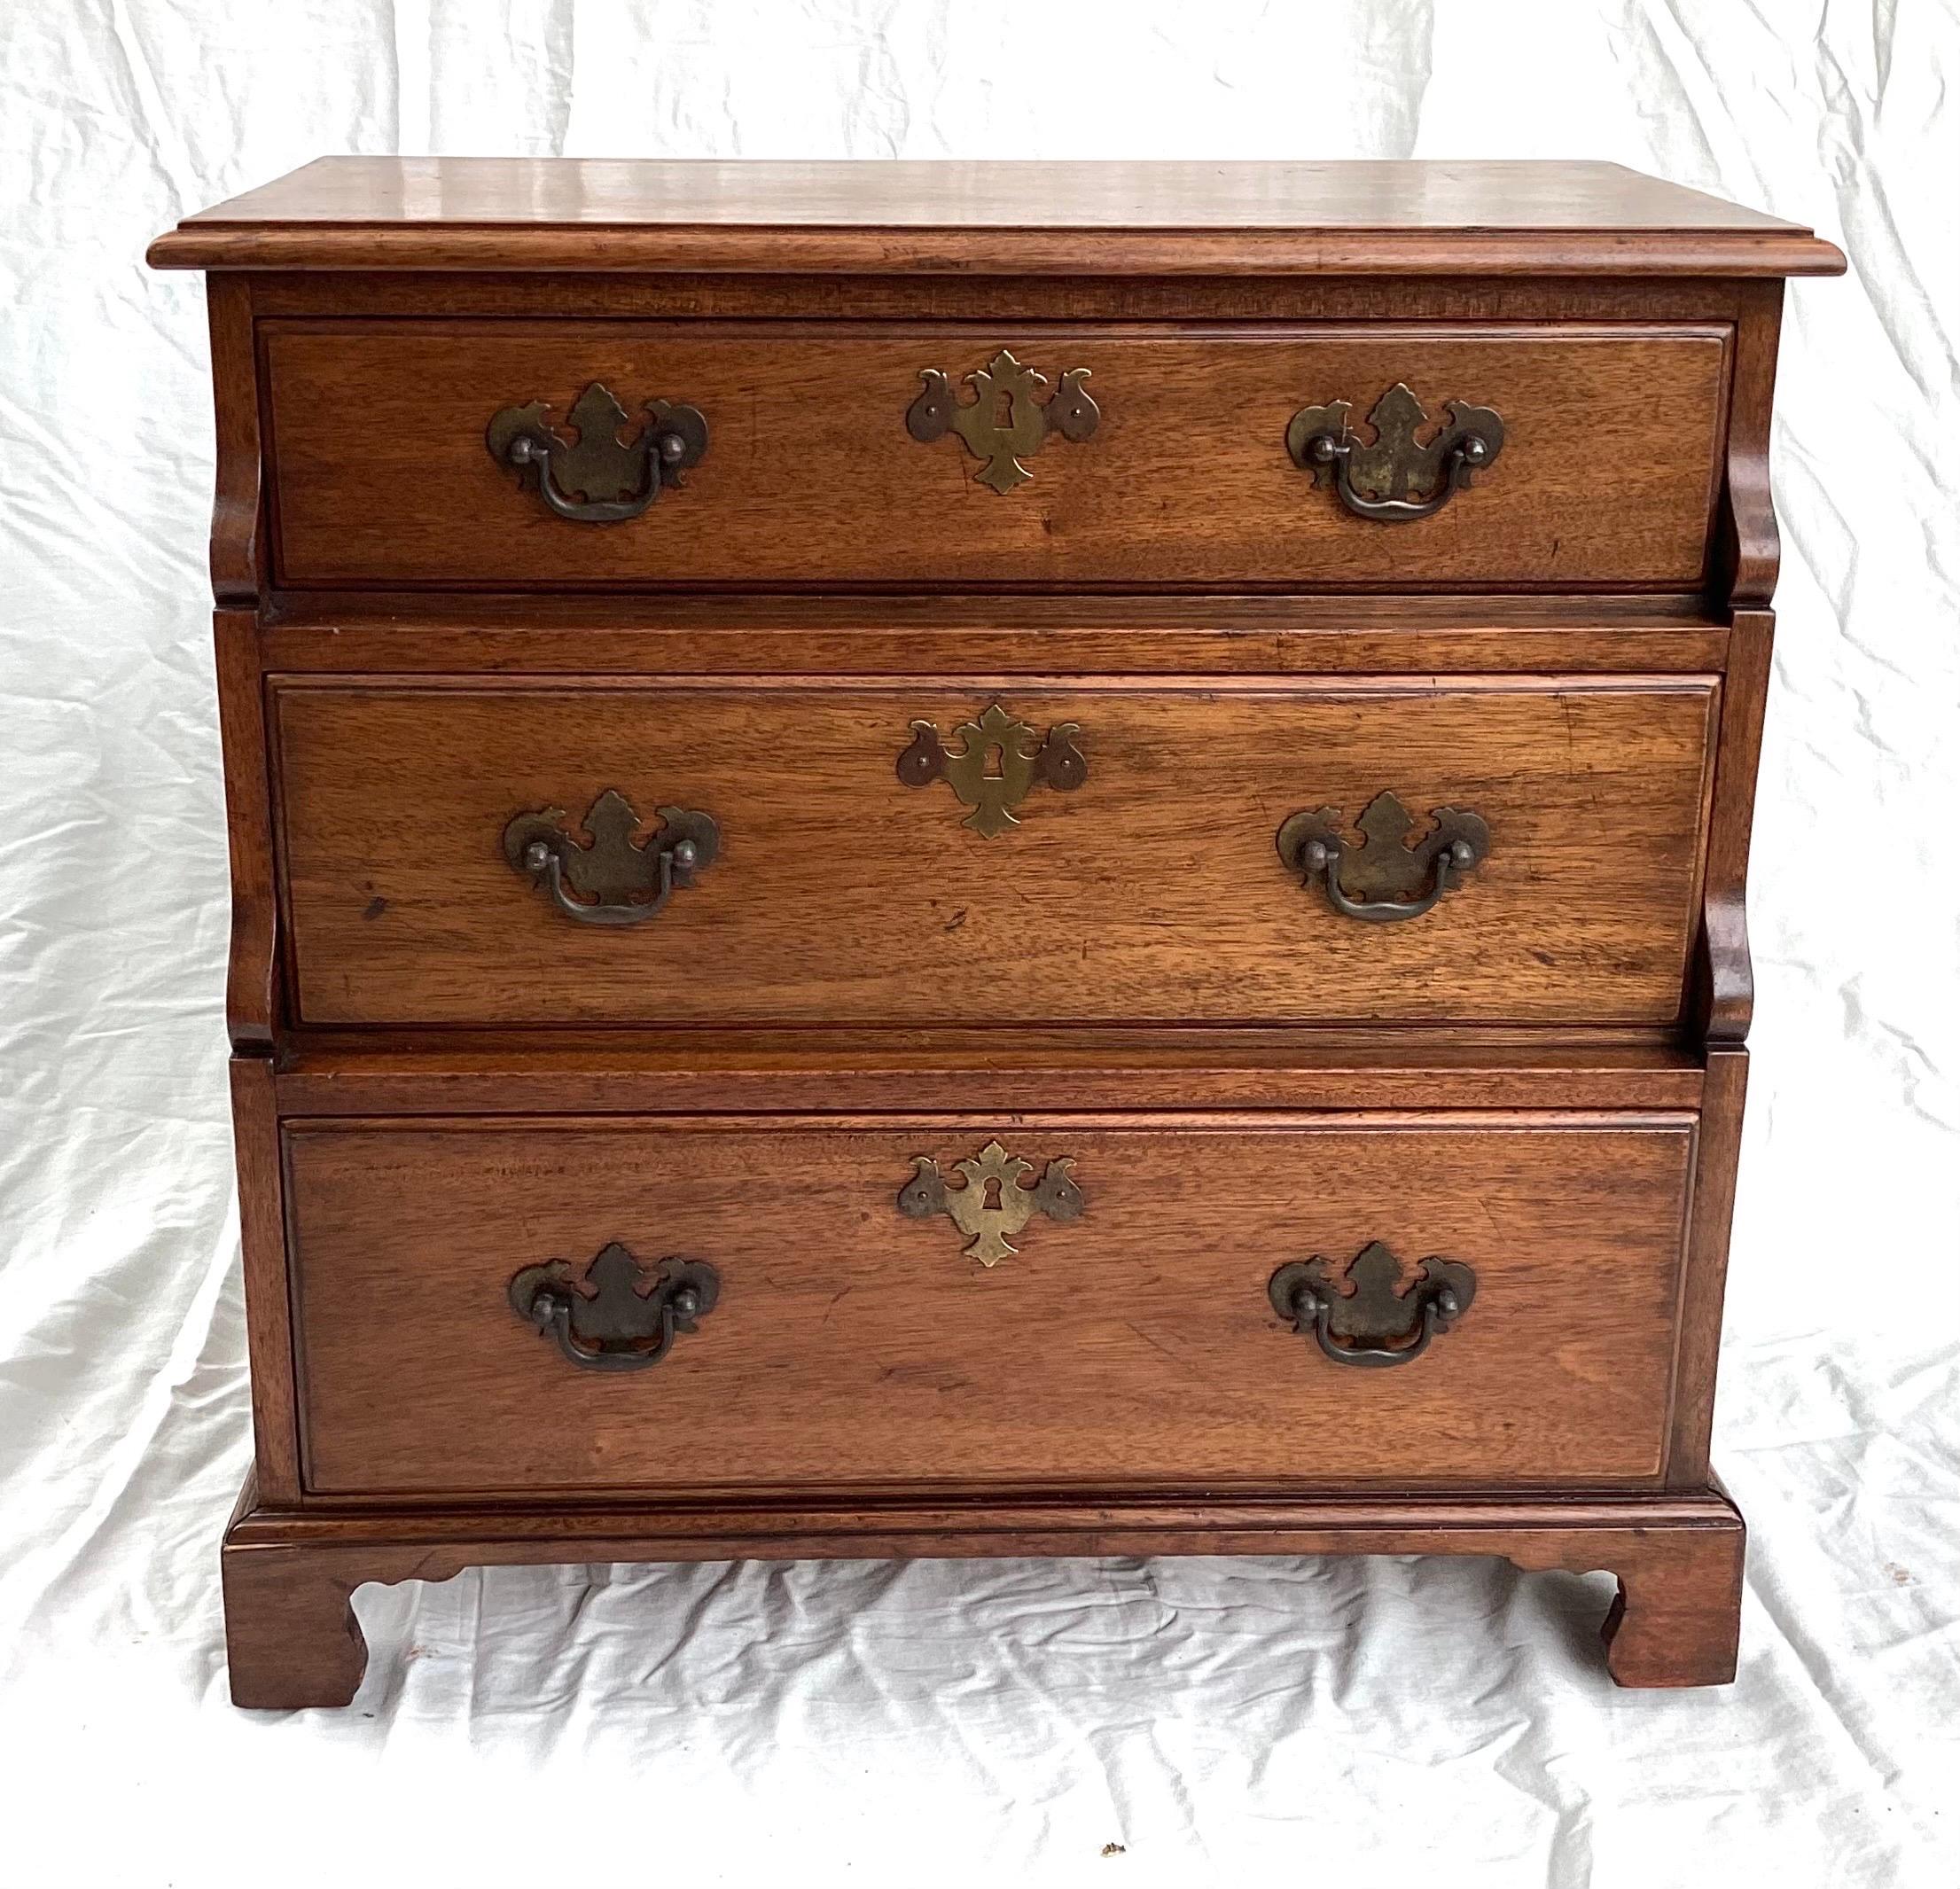 Vintage Mahogany Three Draw Small Chest or Night Stand with Step Back Drawers. 22w 10 1/4d on top 12”d at base 22 tall. Age-appropriate ware. Some minor discoloring on top.
Local pick-up and Local delivery available.